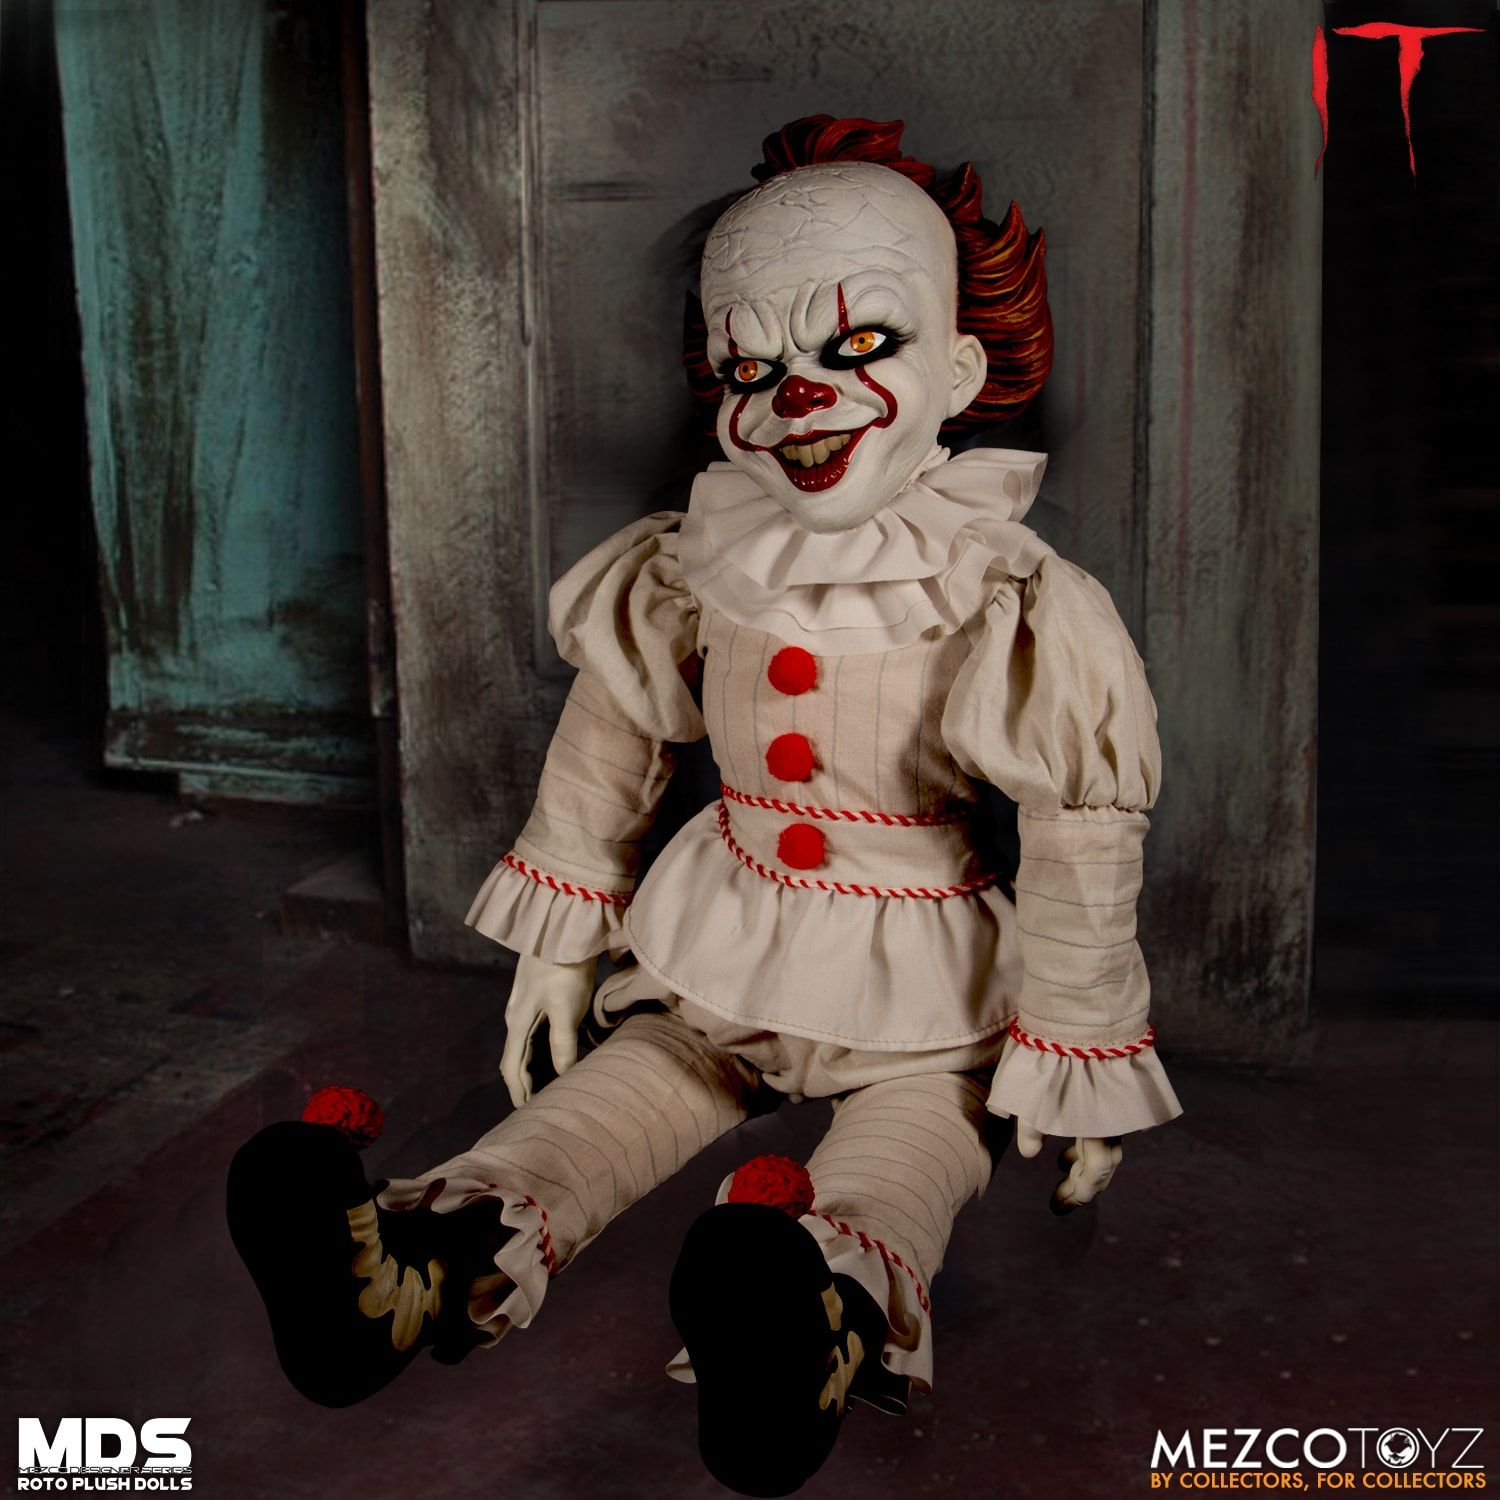 pennywise plush doll